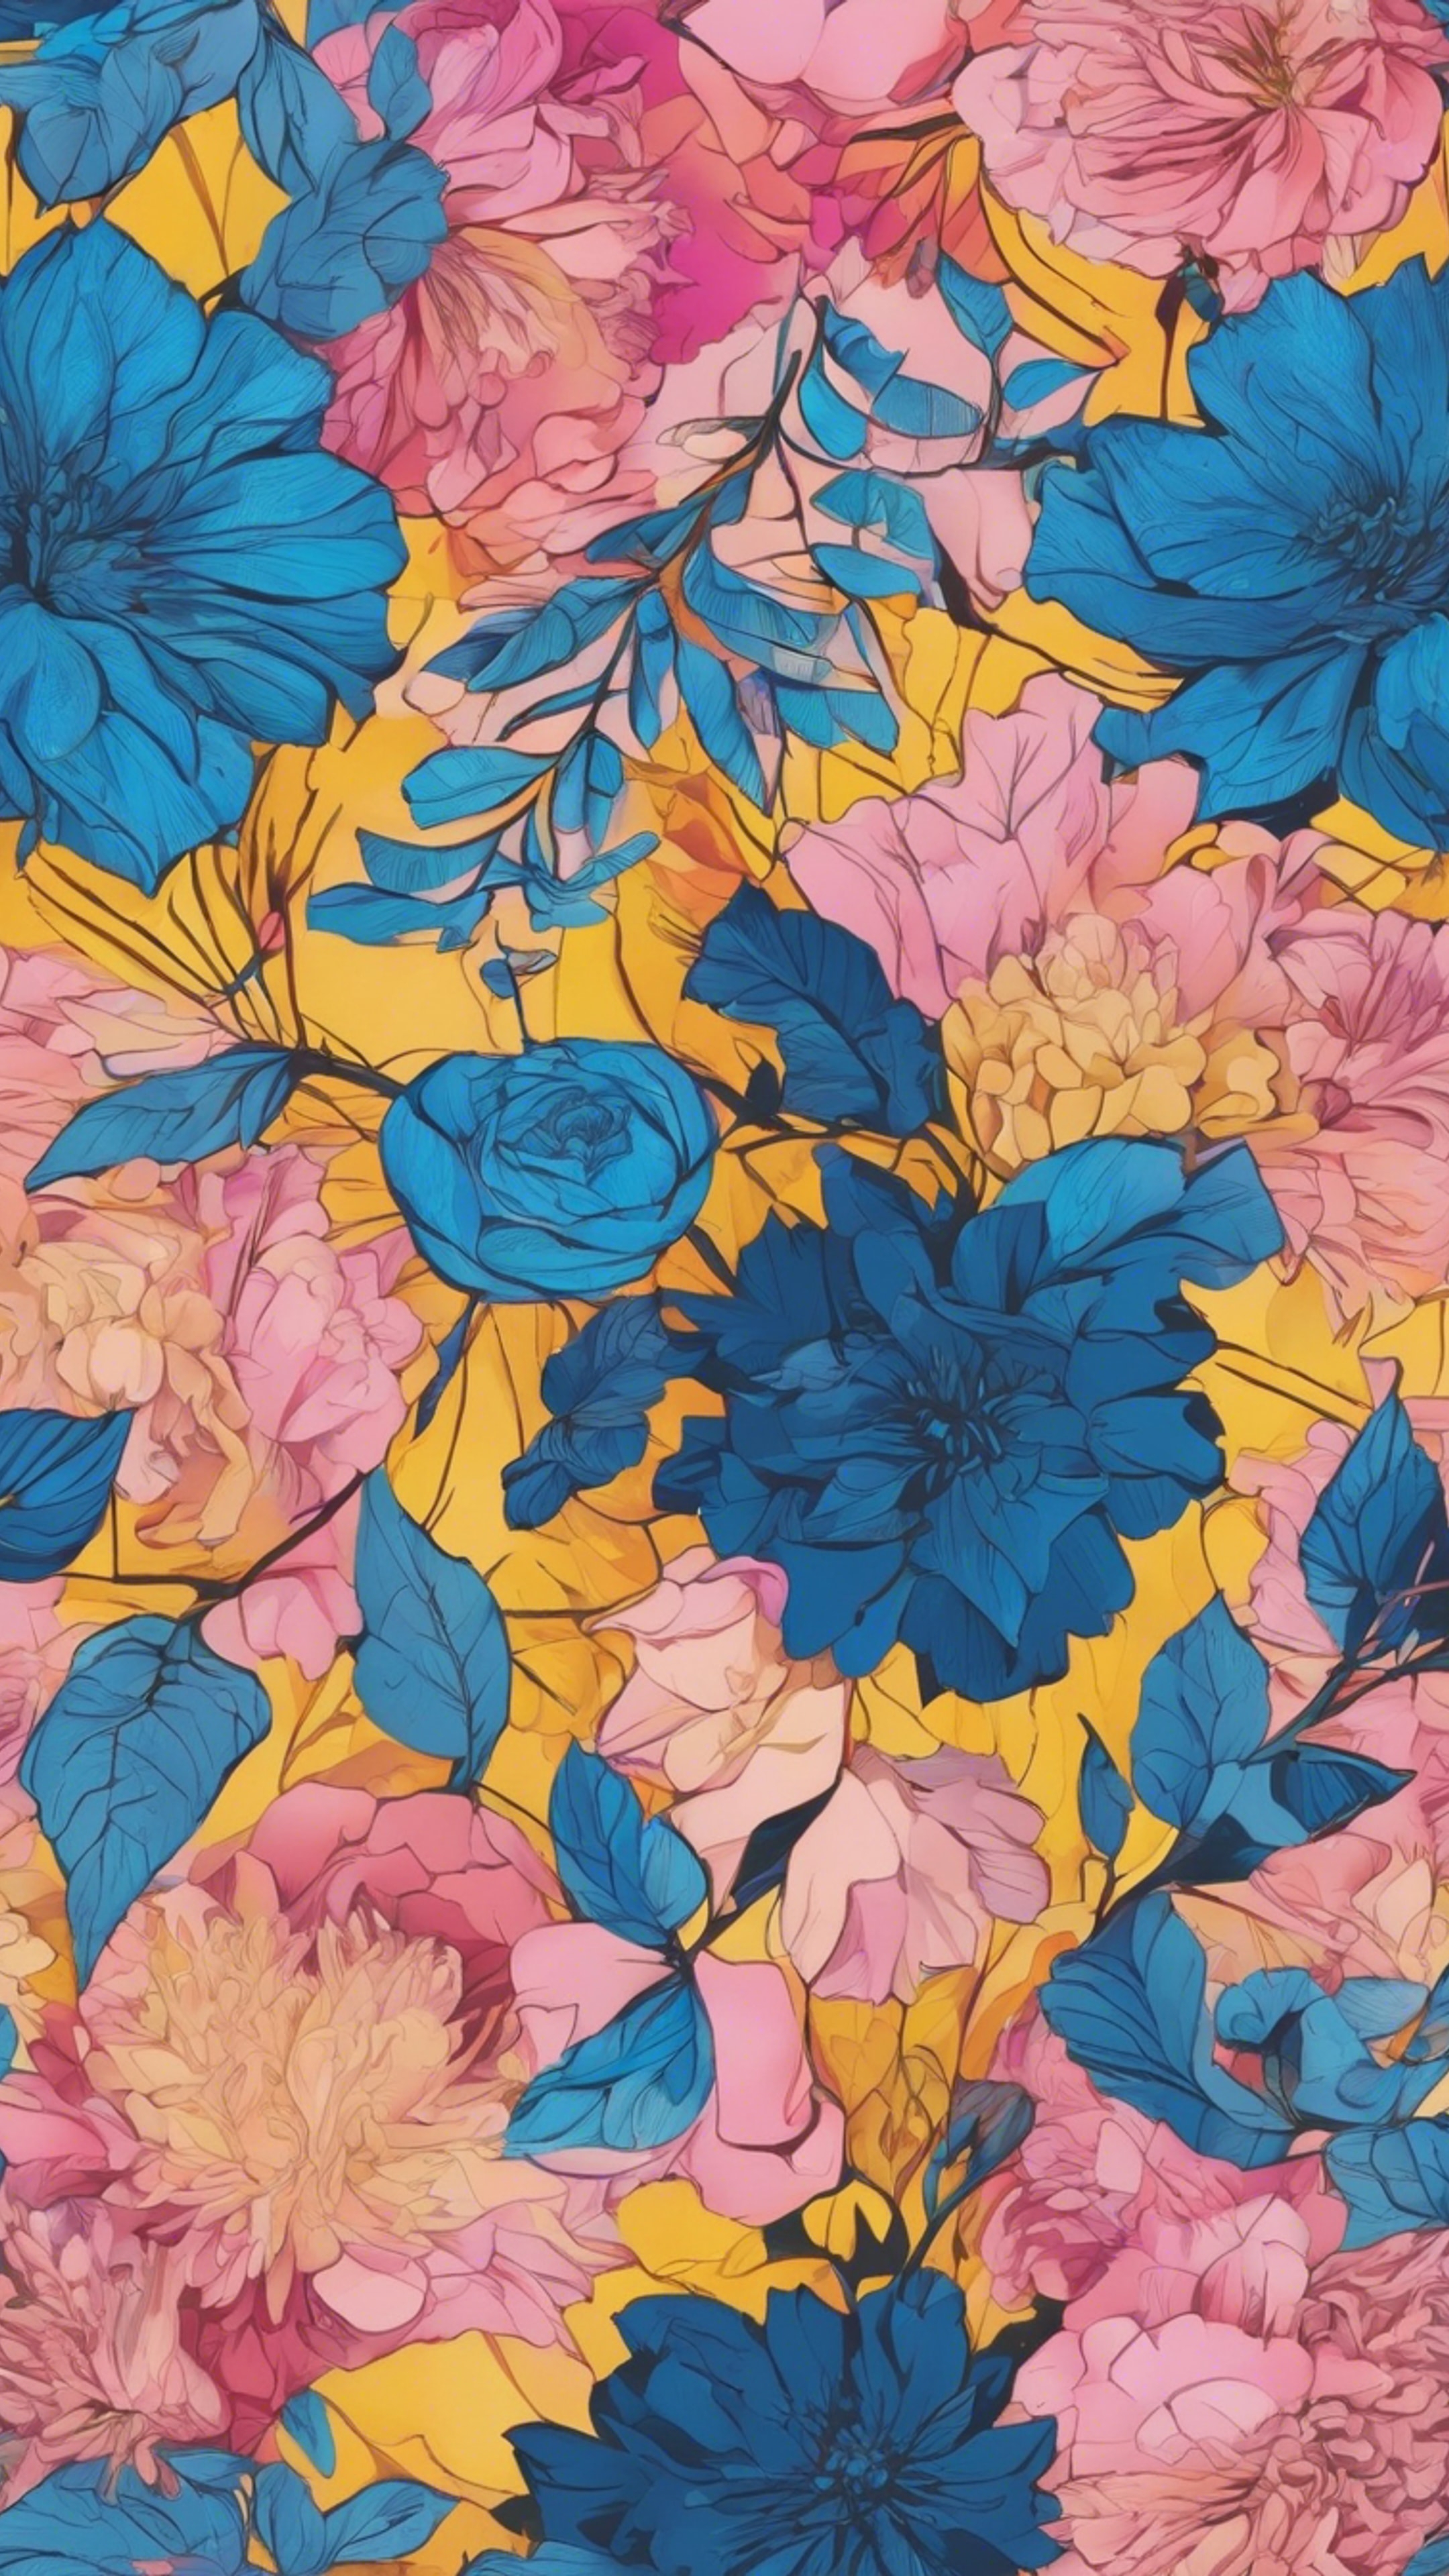 An intricate floral pattern inspired by modern art, using bold and vibrant shades of blue, pink and yellow. Wallpaper[f0a230b403d54ae78f5a]